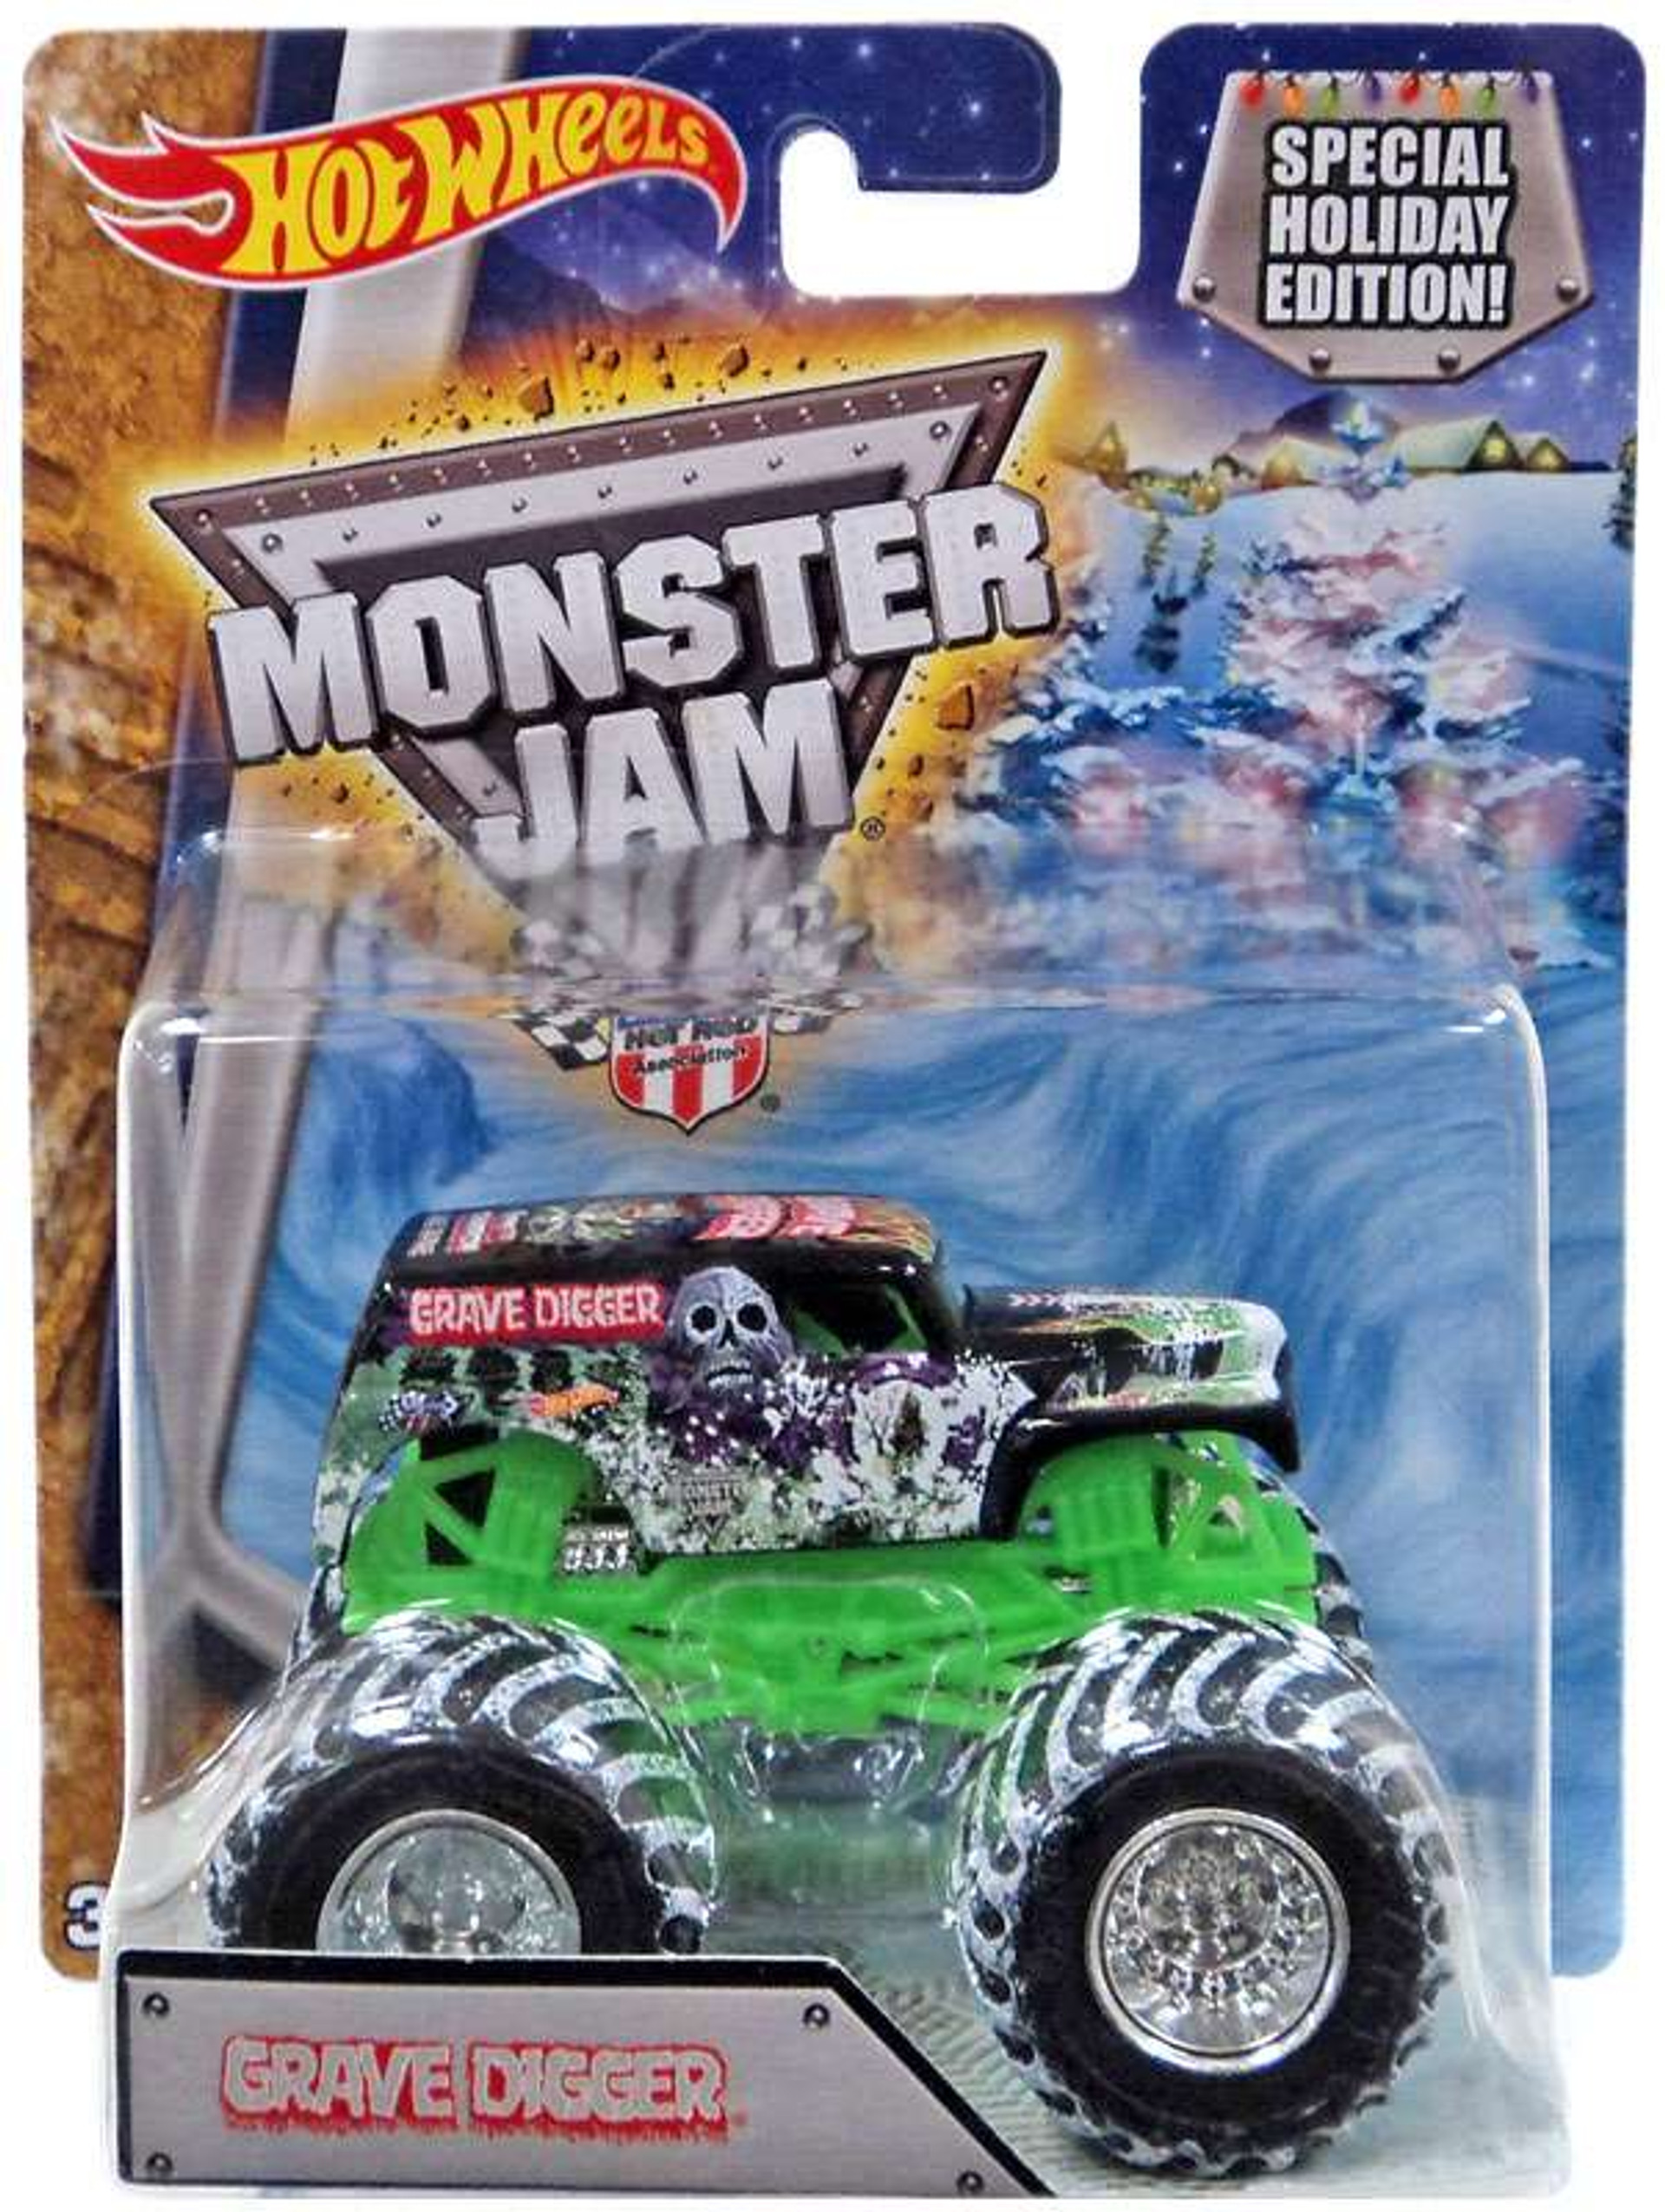 Hot Wheels Monster Jam 25 Grave Digger 164 Die Cast Car Special Holiday Edition Mattel Toys Toywiz 7606